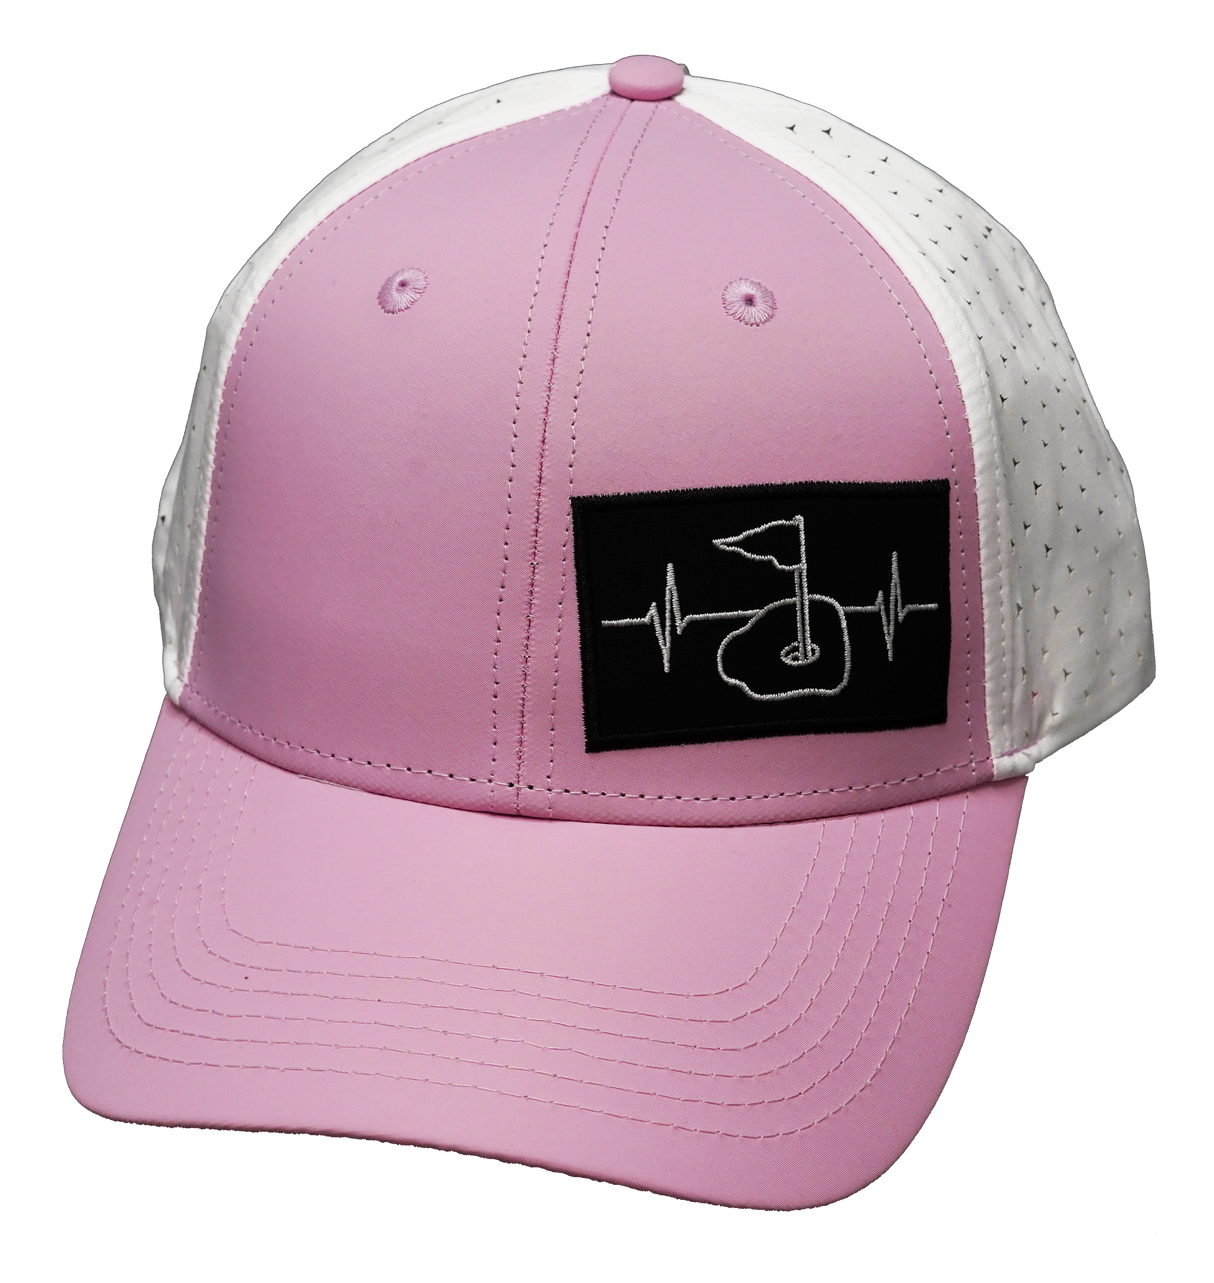 Golf - 6 Panel - Shallow Fit - Pony Tail - Pink / White (No Photo)